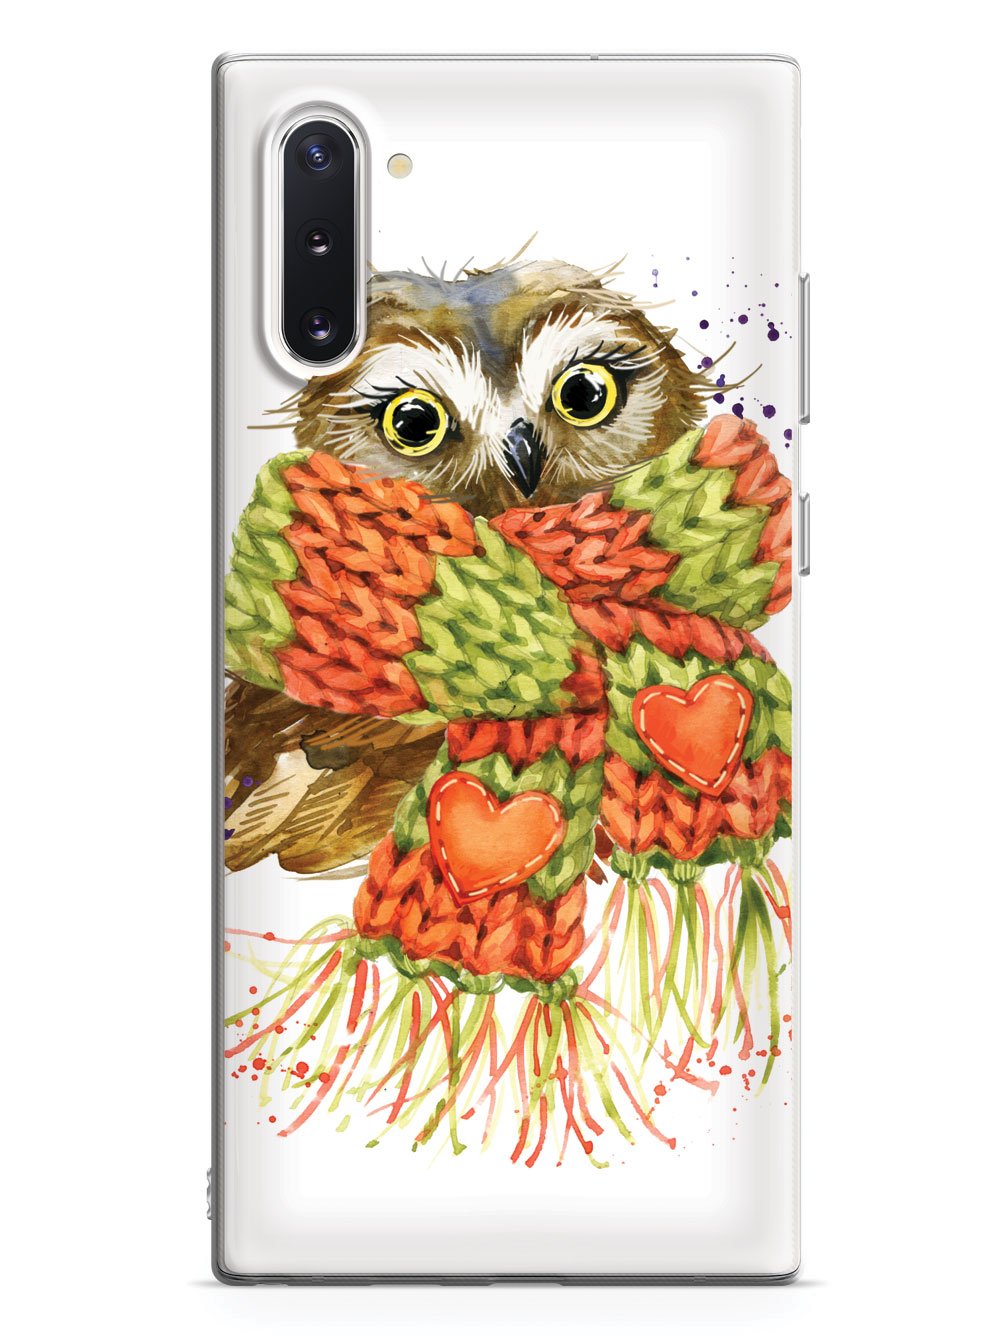 Autumn Owl with Scarf Case